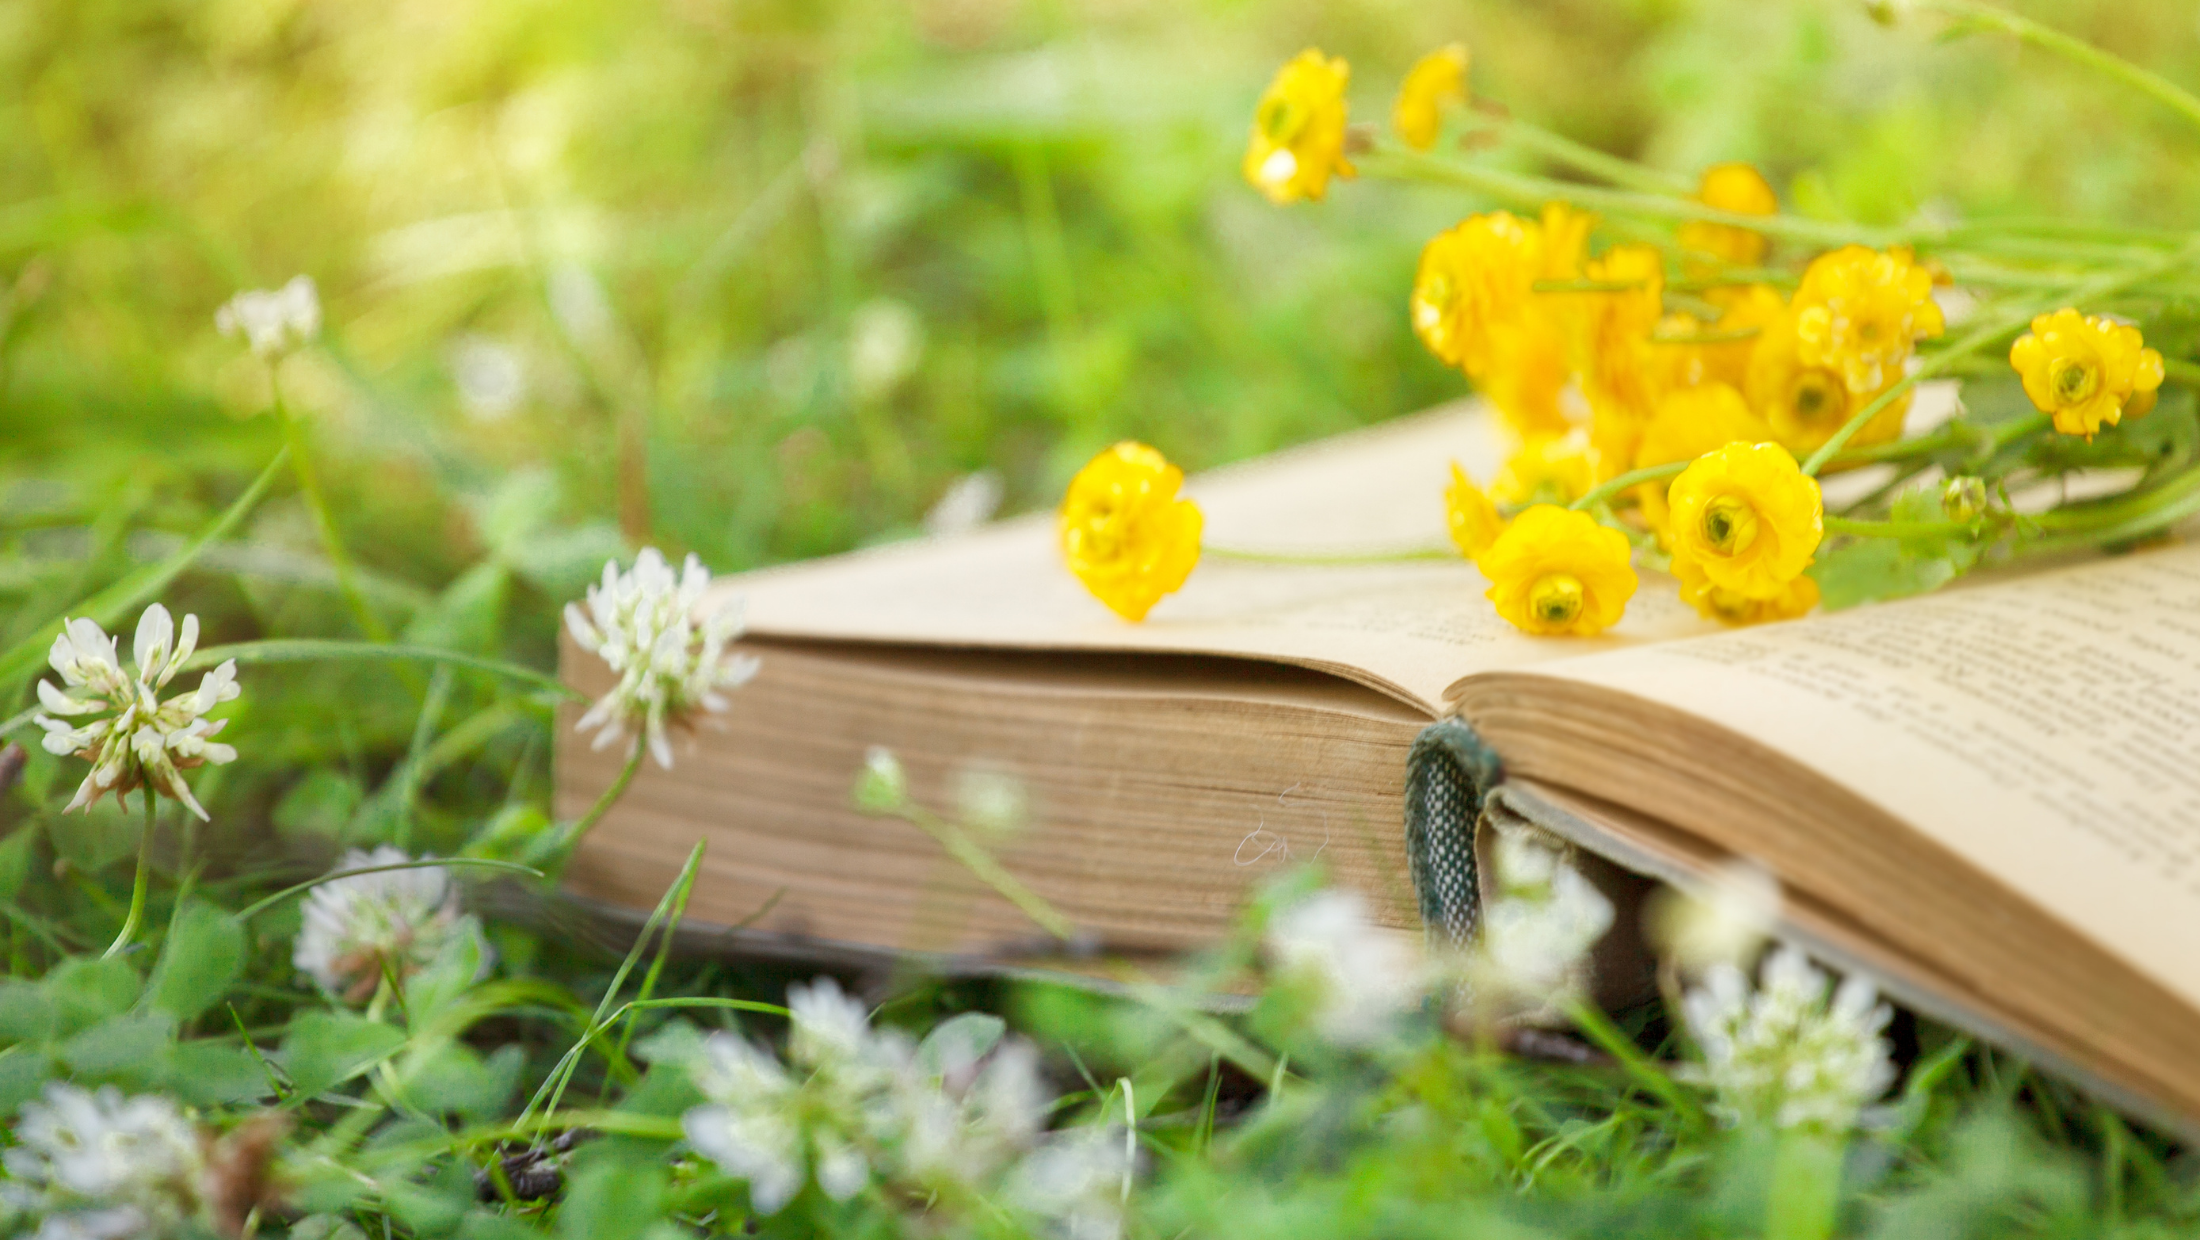 Book in summer with yellow flowers on the open pages